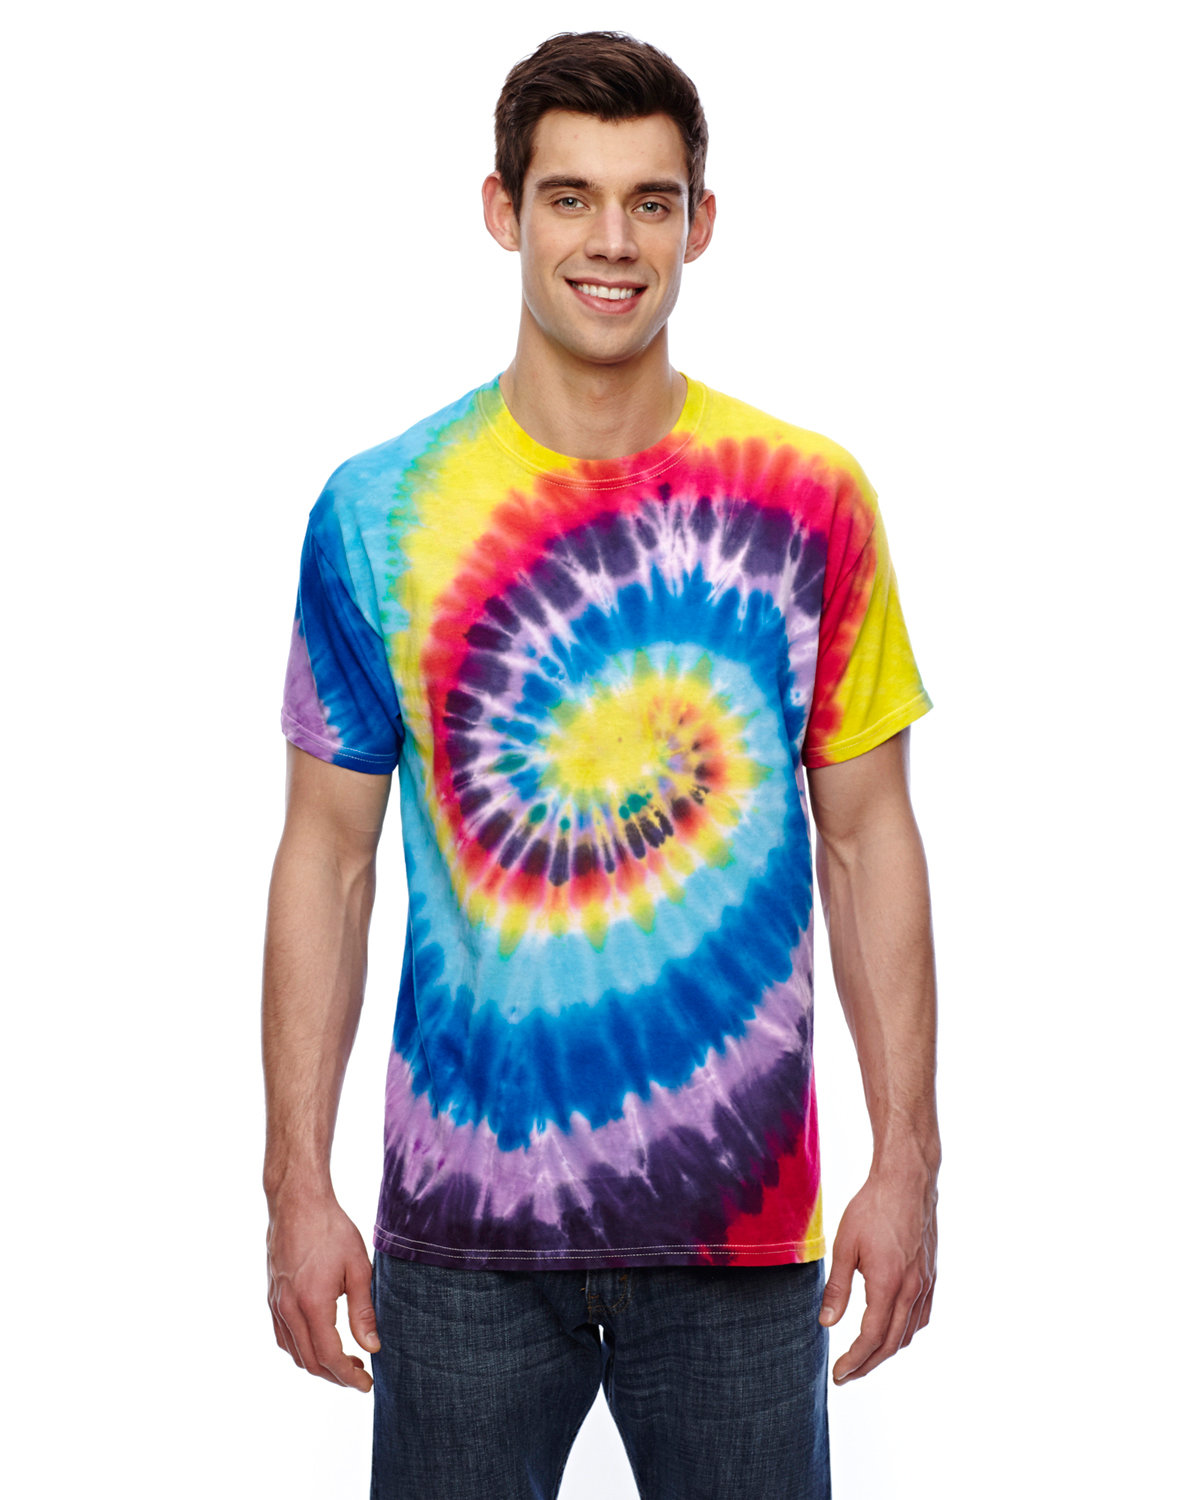 Tie-dye NEW t-shirt abstraction Tie-dye 789680 